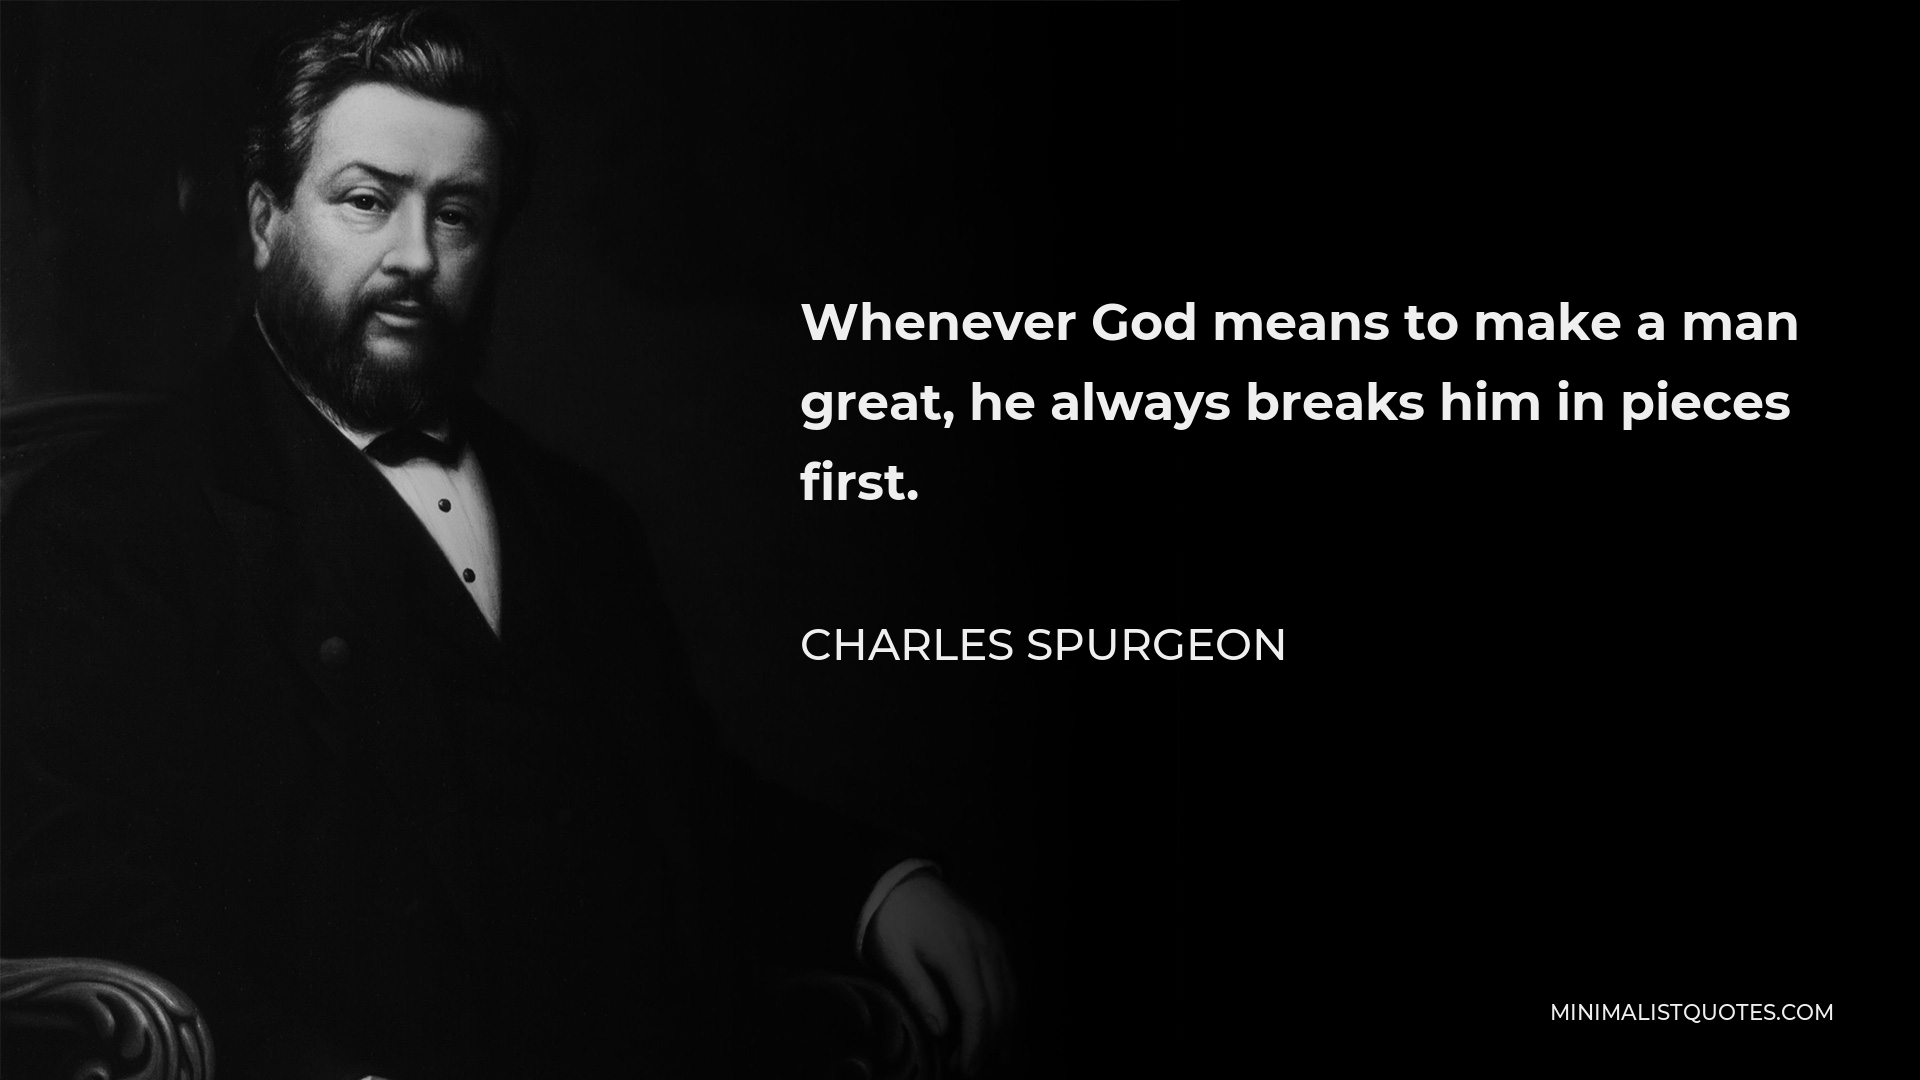 Charles Spurgeon Quote - Whenever God means to make a man great, he always breaks him in pieces first.